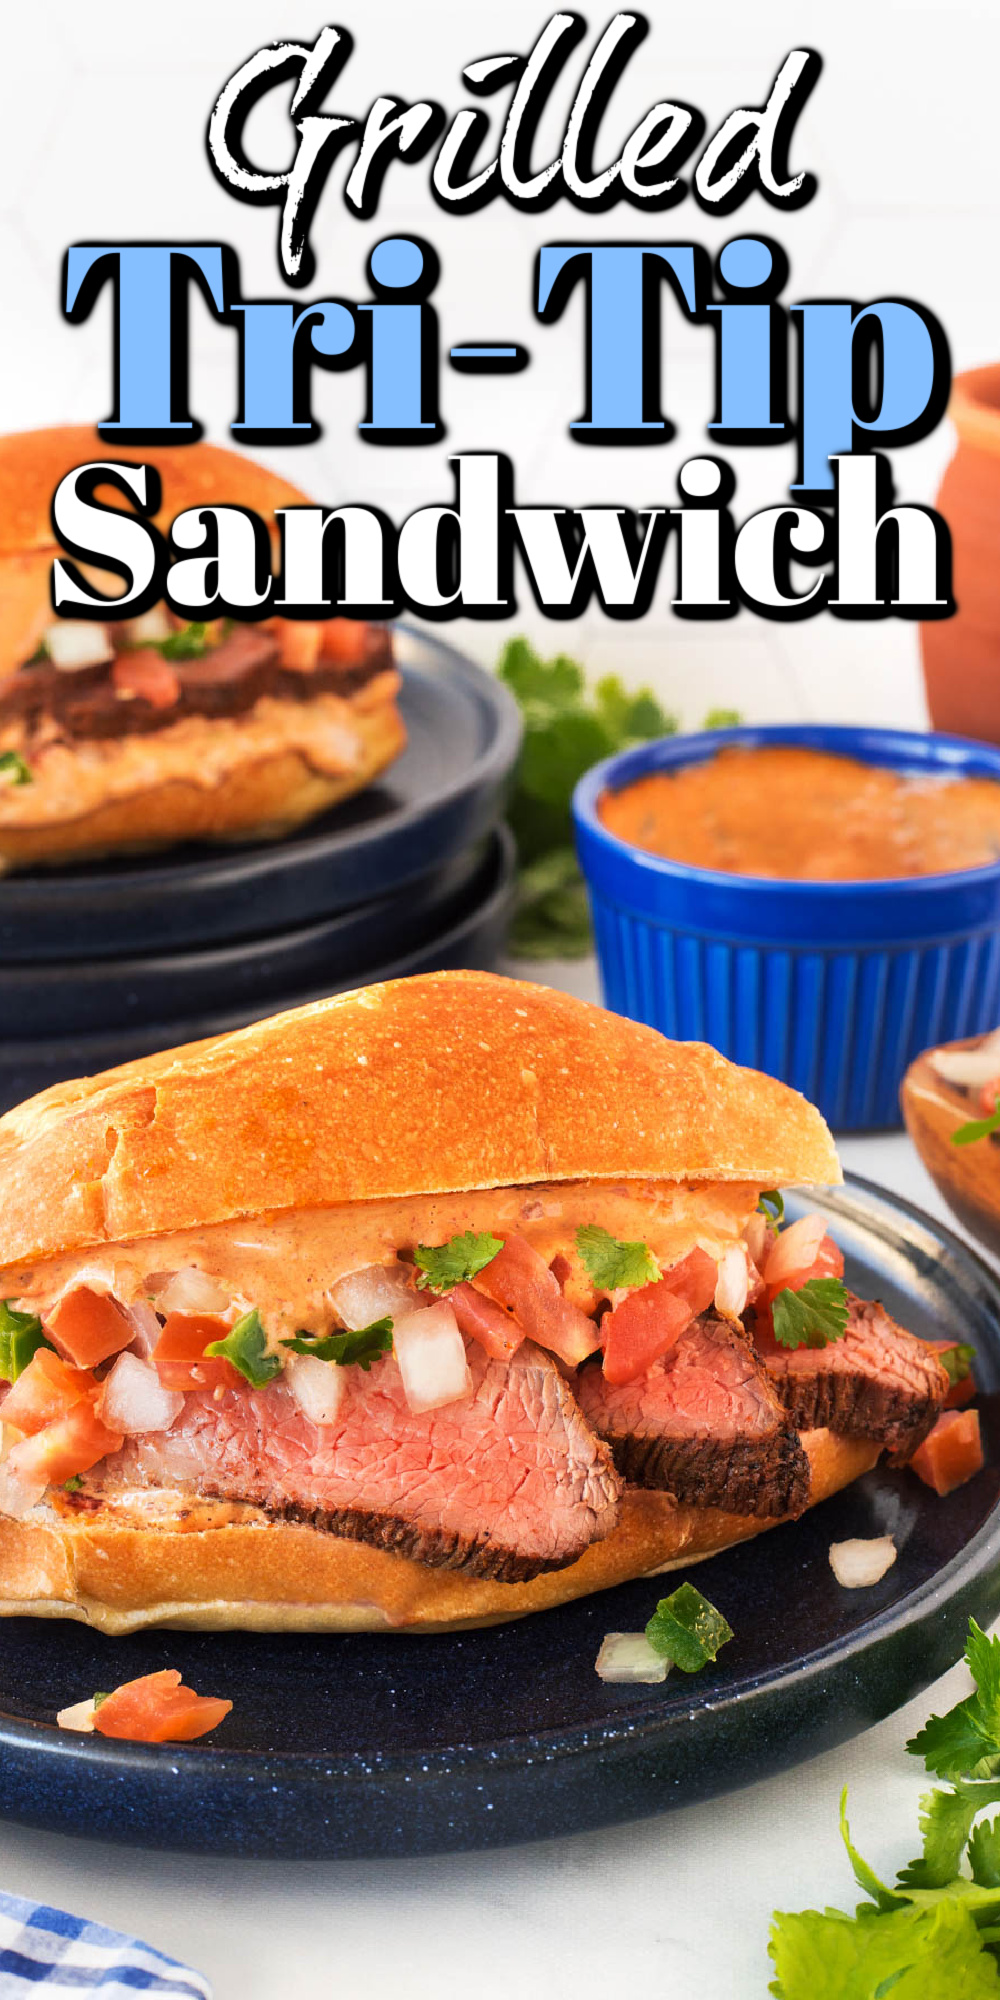 This Grilled Tri-tip or Santa Maria Sandwich with pico de gallo and chipotle mayo is absolutely amazing!